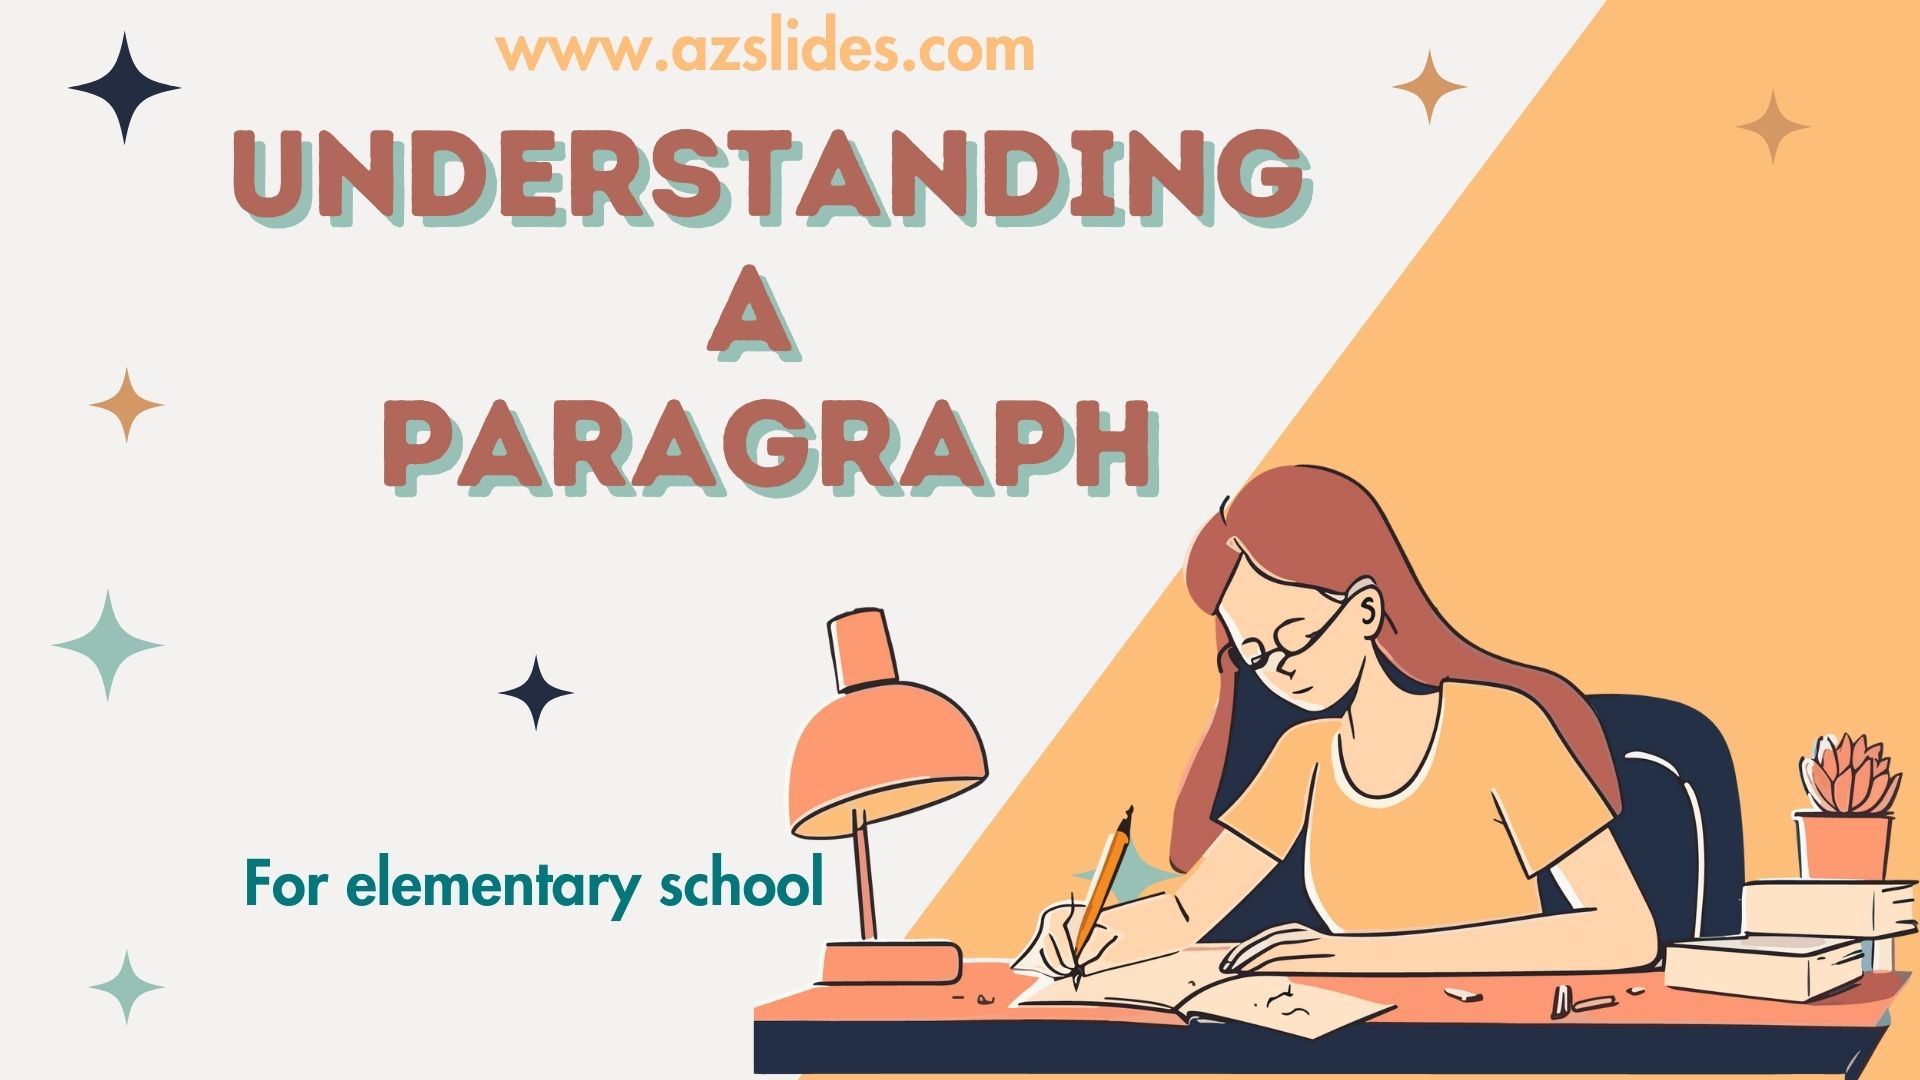 Understanding a paragraph presentation for elementary school Free ...